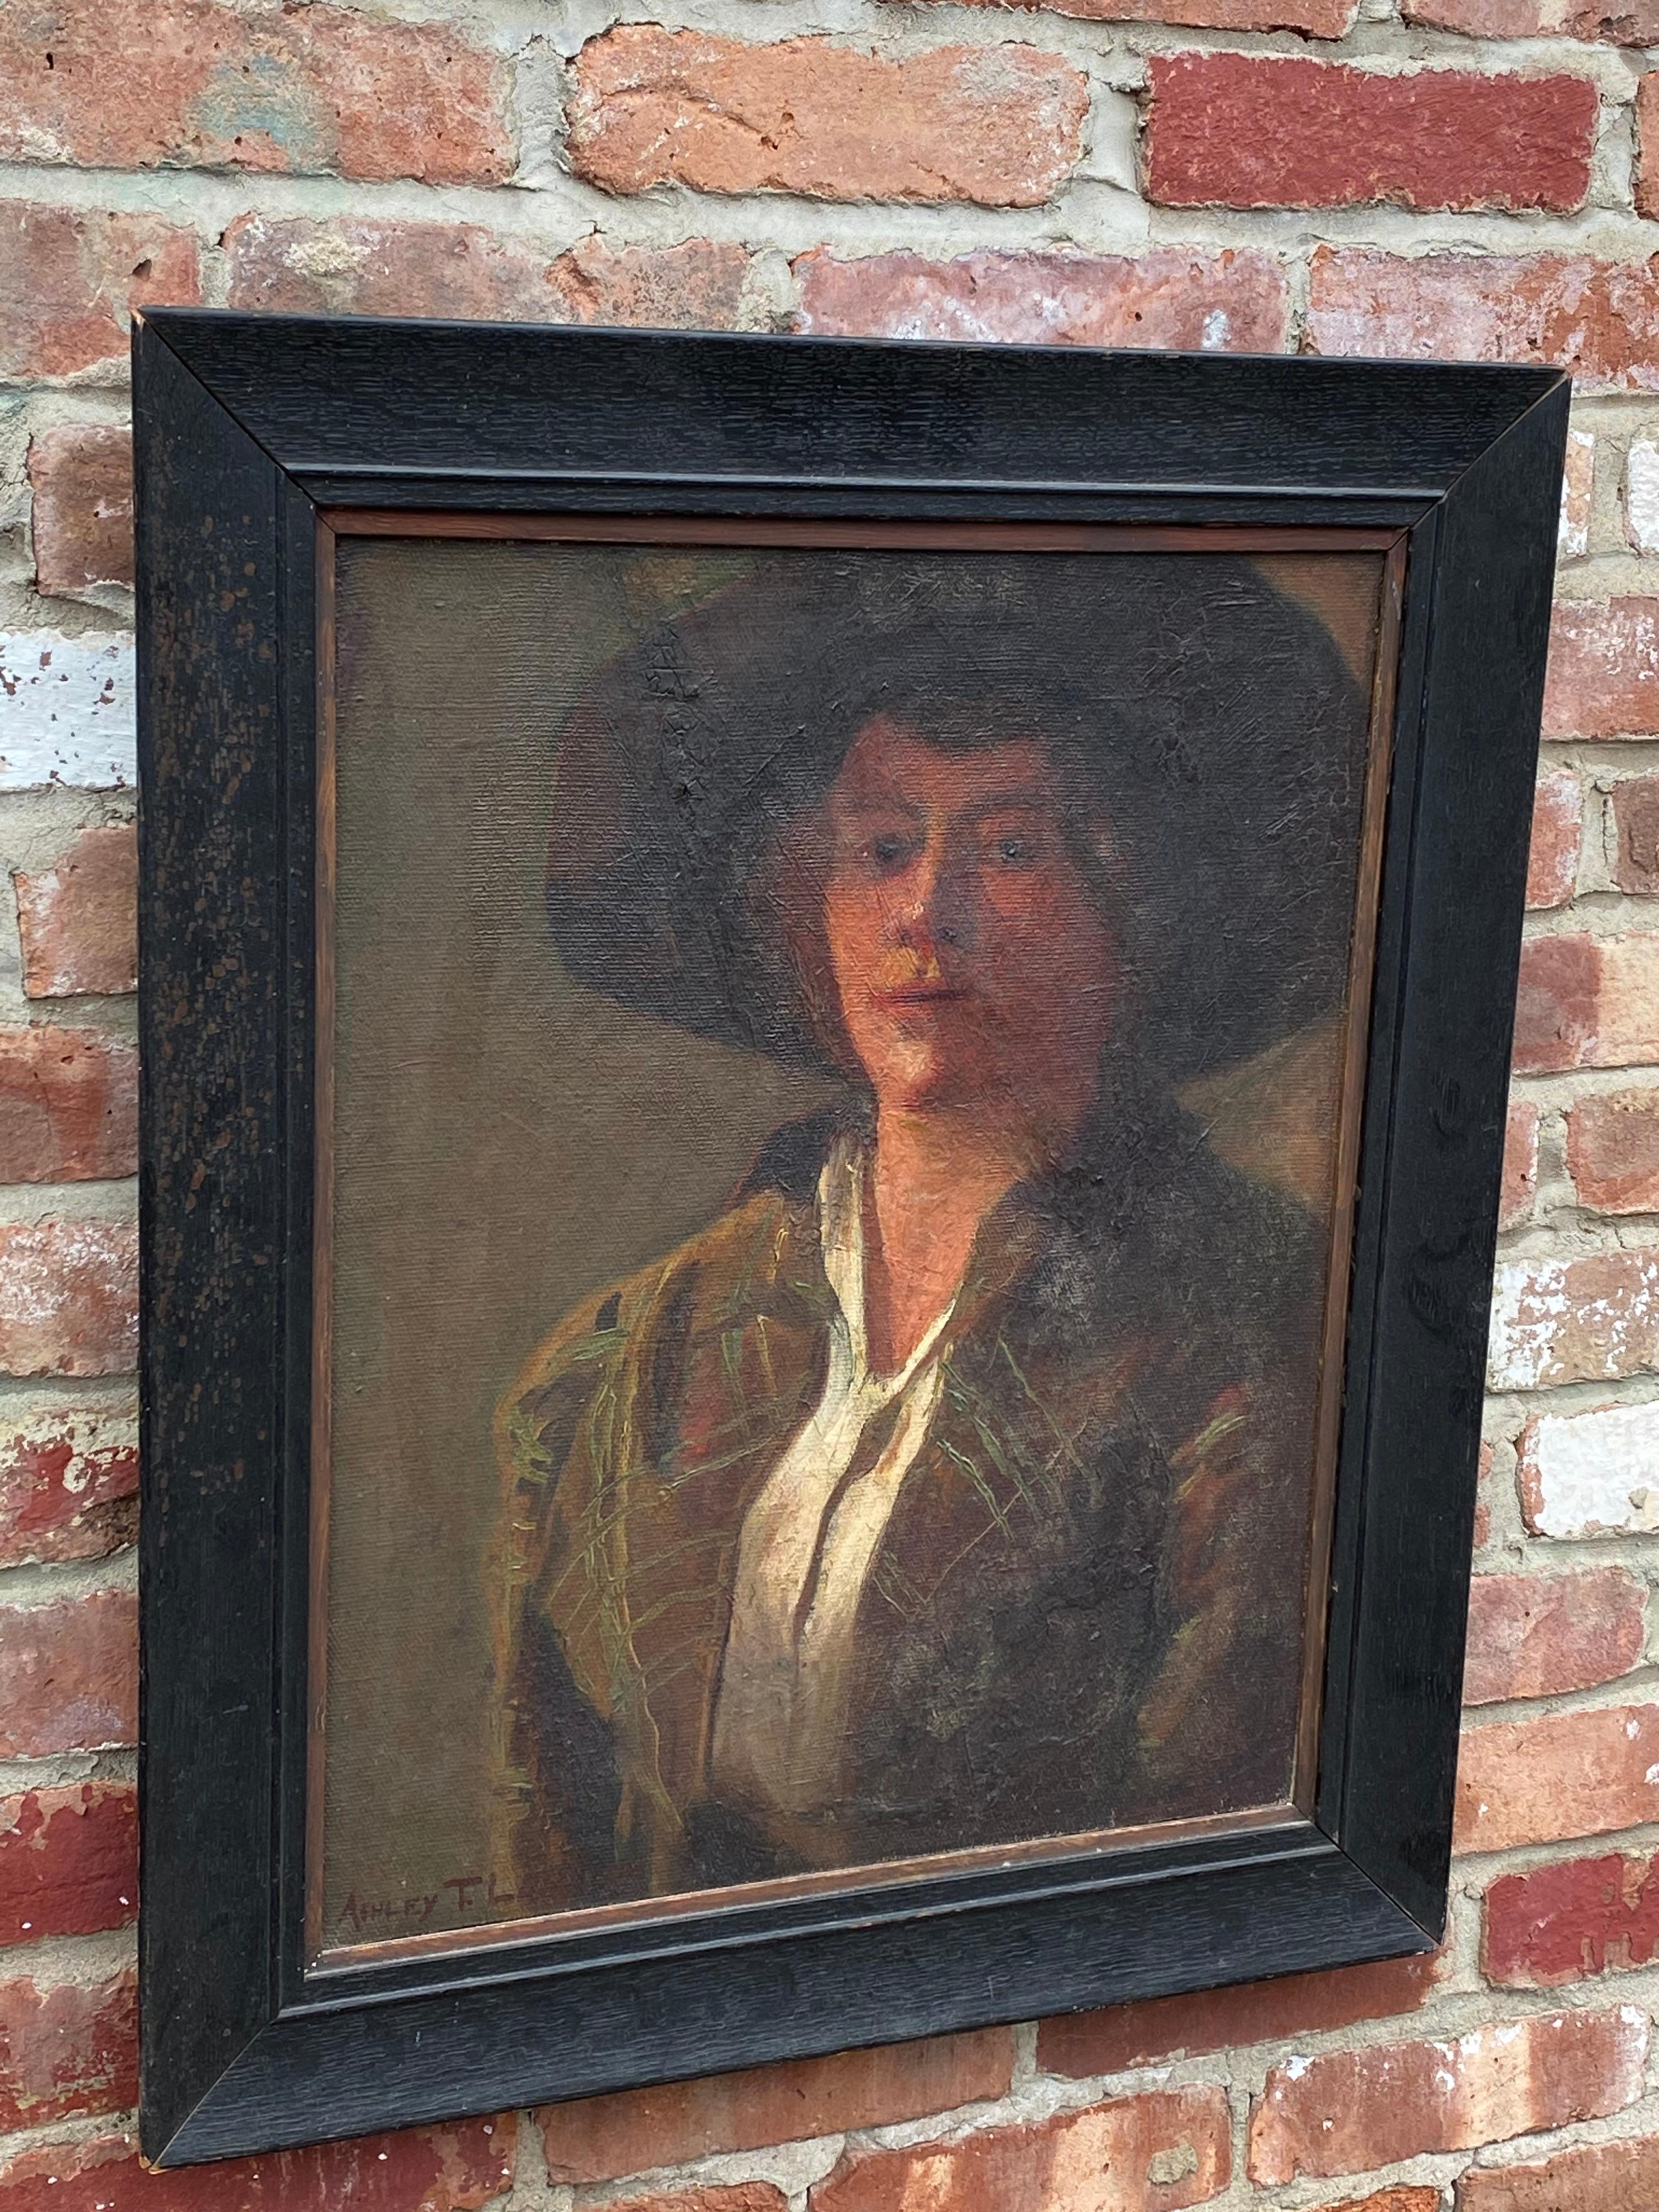 Moody portrait of a woman by Ashley T. Law, circa 1913. Woman in a wide brim hat done 3/4 pose. Bathed in light and shadow. The artist, Ashley Law, had quite the life as an artist, reverend and WW I veteran. Law also had painted the 1976 portraits